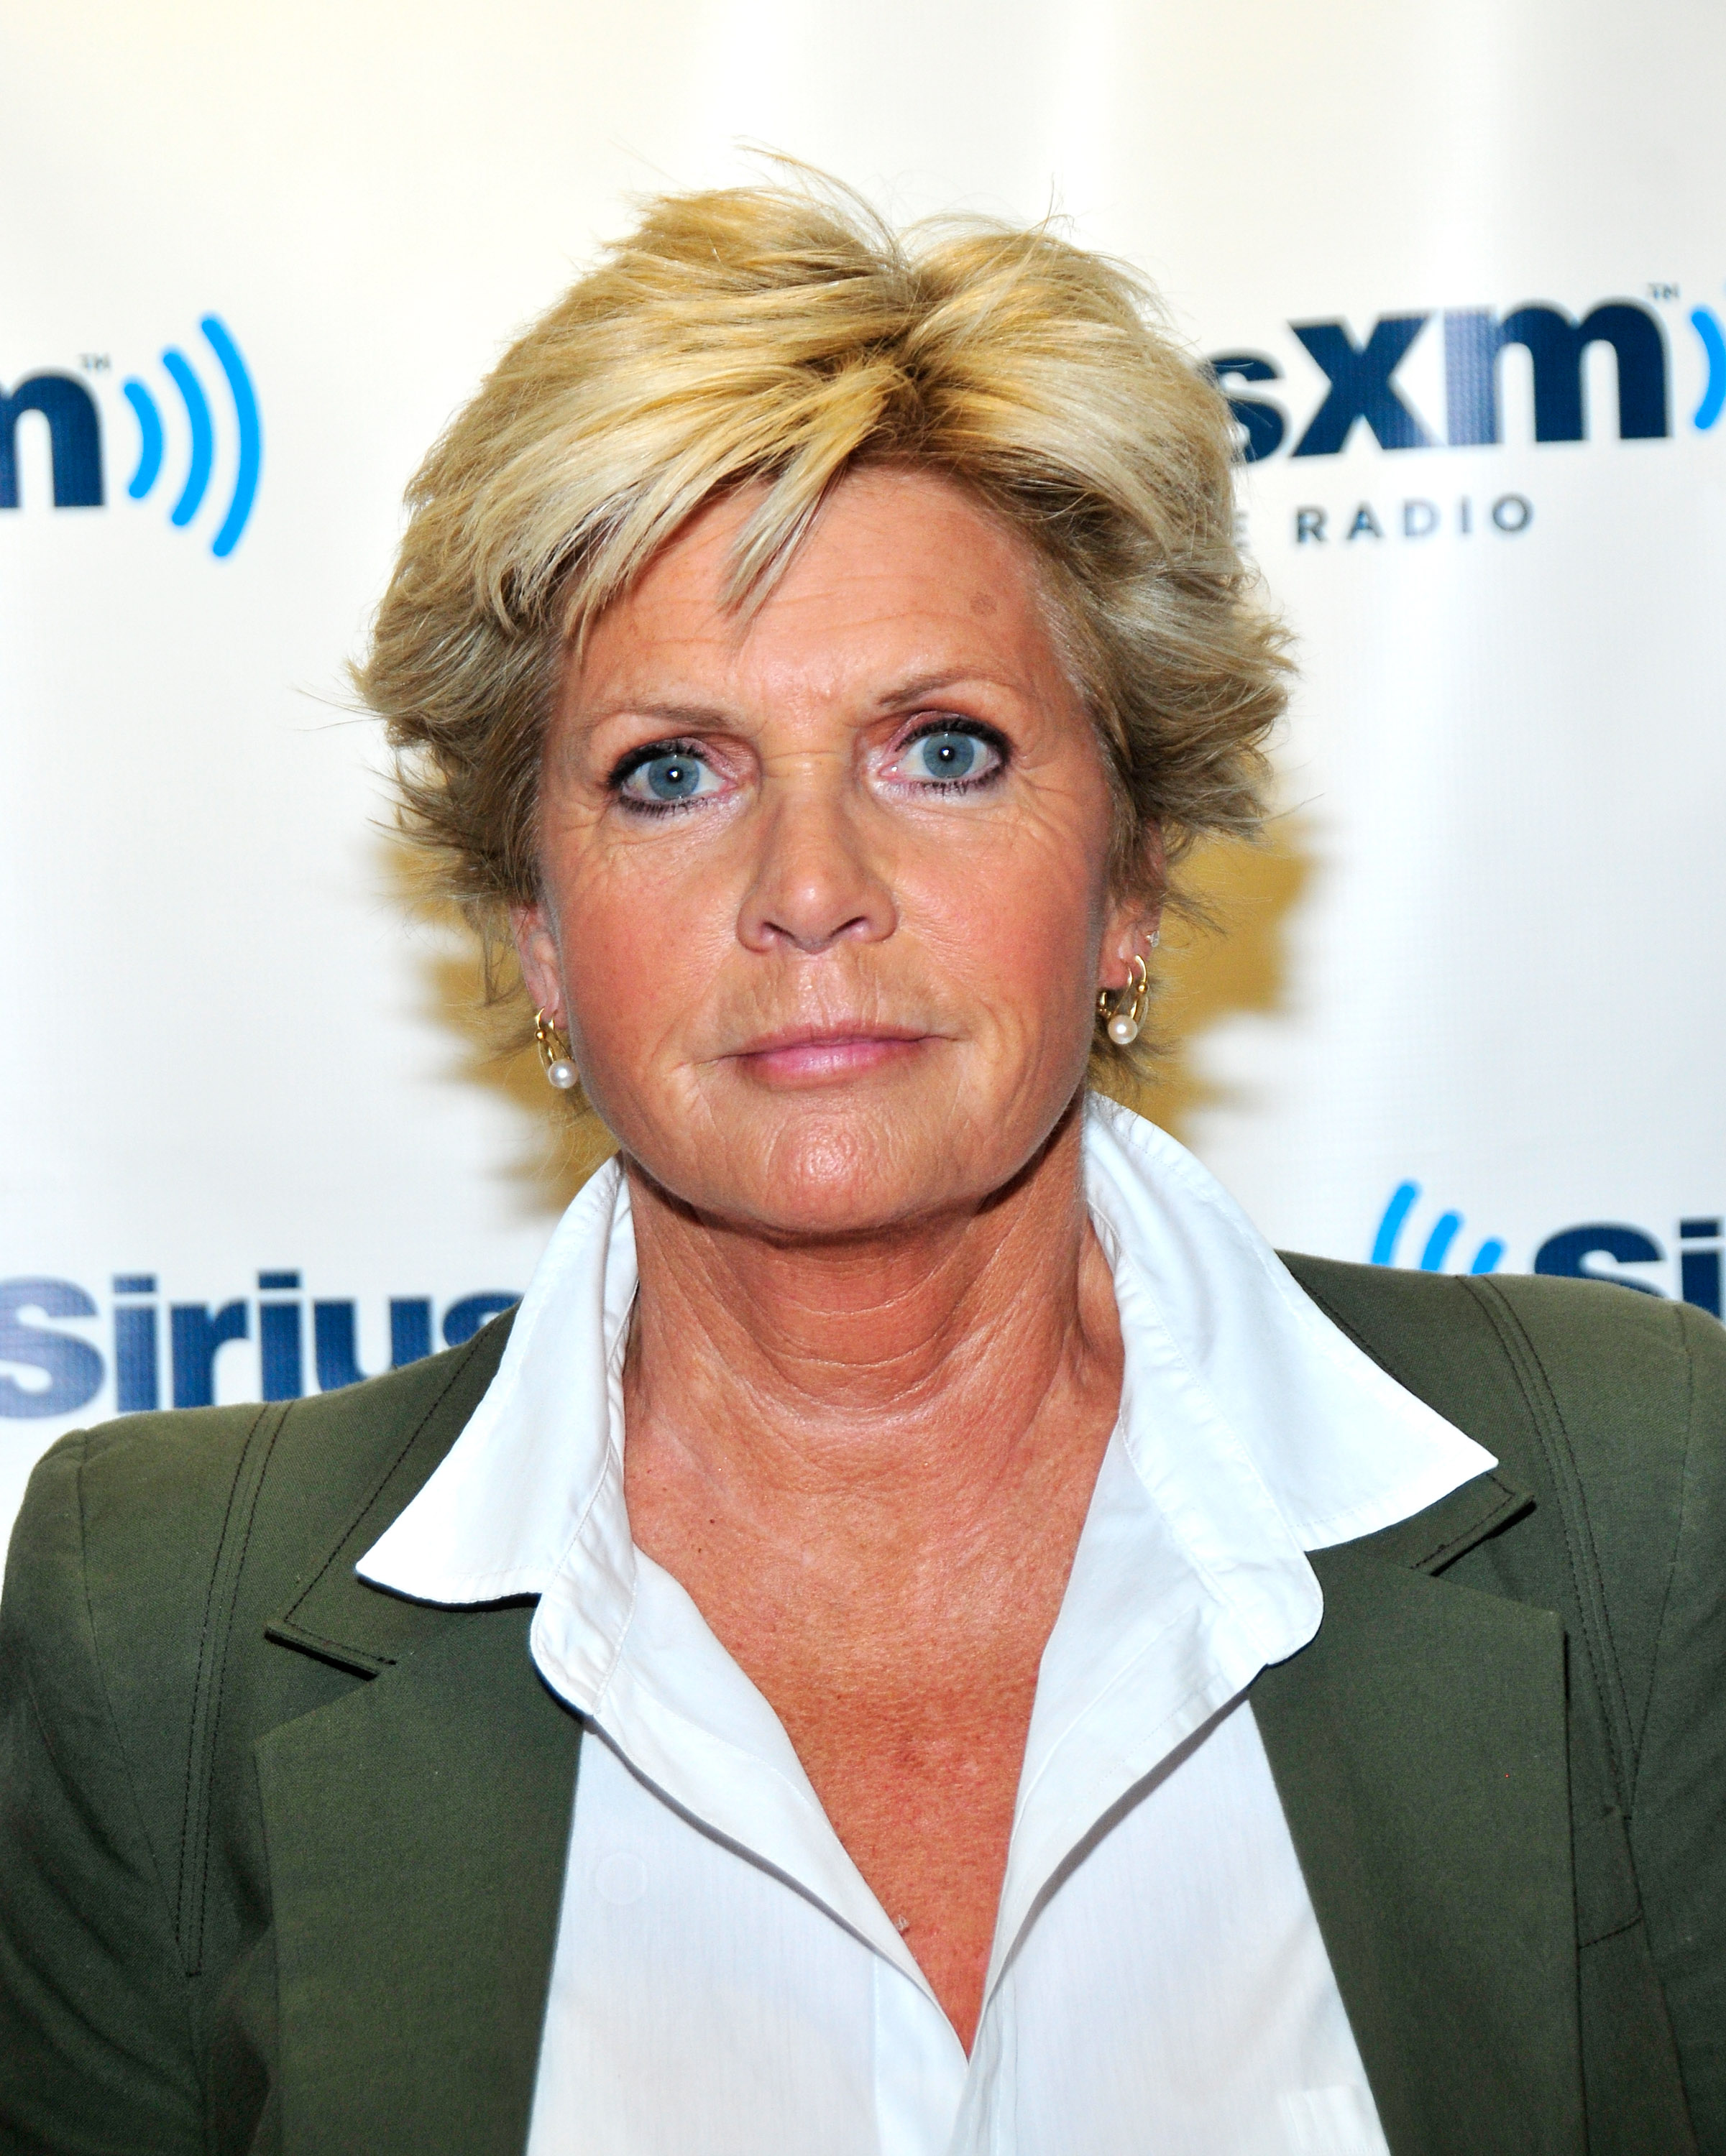 Meredith Baxter promots her book "UNTIED: A Memoir of Family, Fame, and Floundering" at SiriusXM Studios on May 2, 2012 in New York City.| Source: Getty Images